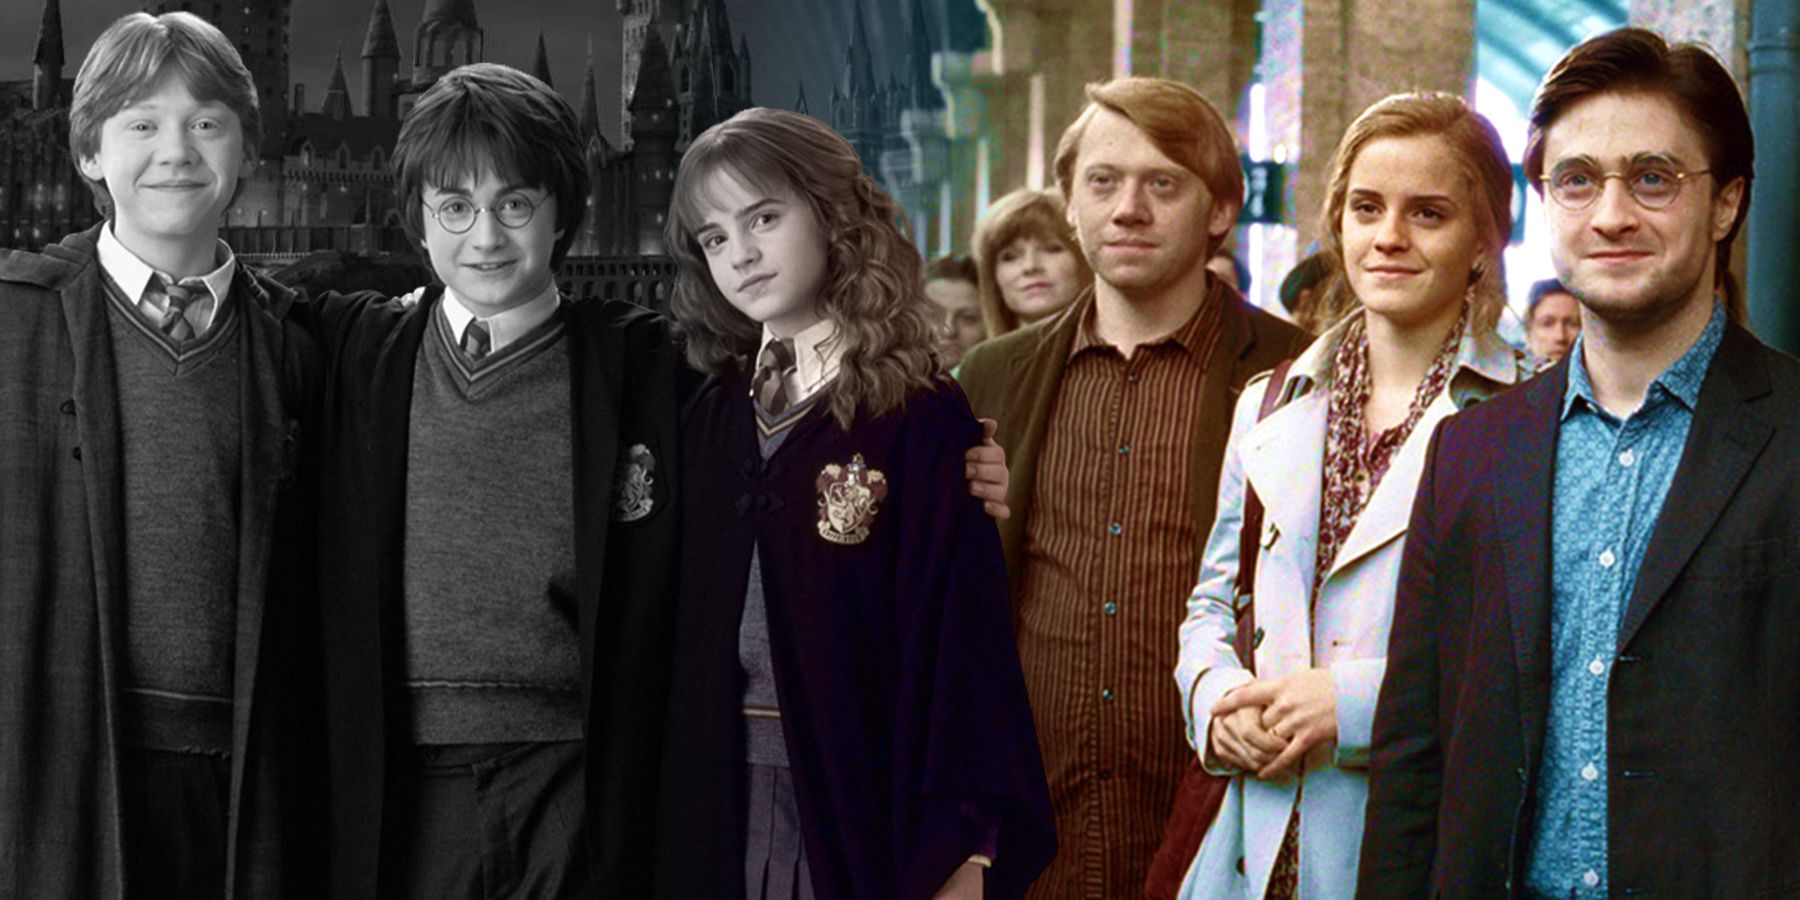 A split image of Harry, Ron, and Hermione young and old from Harry Potter franchise